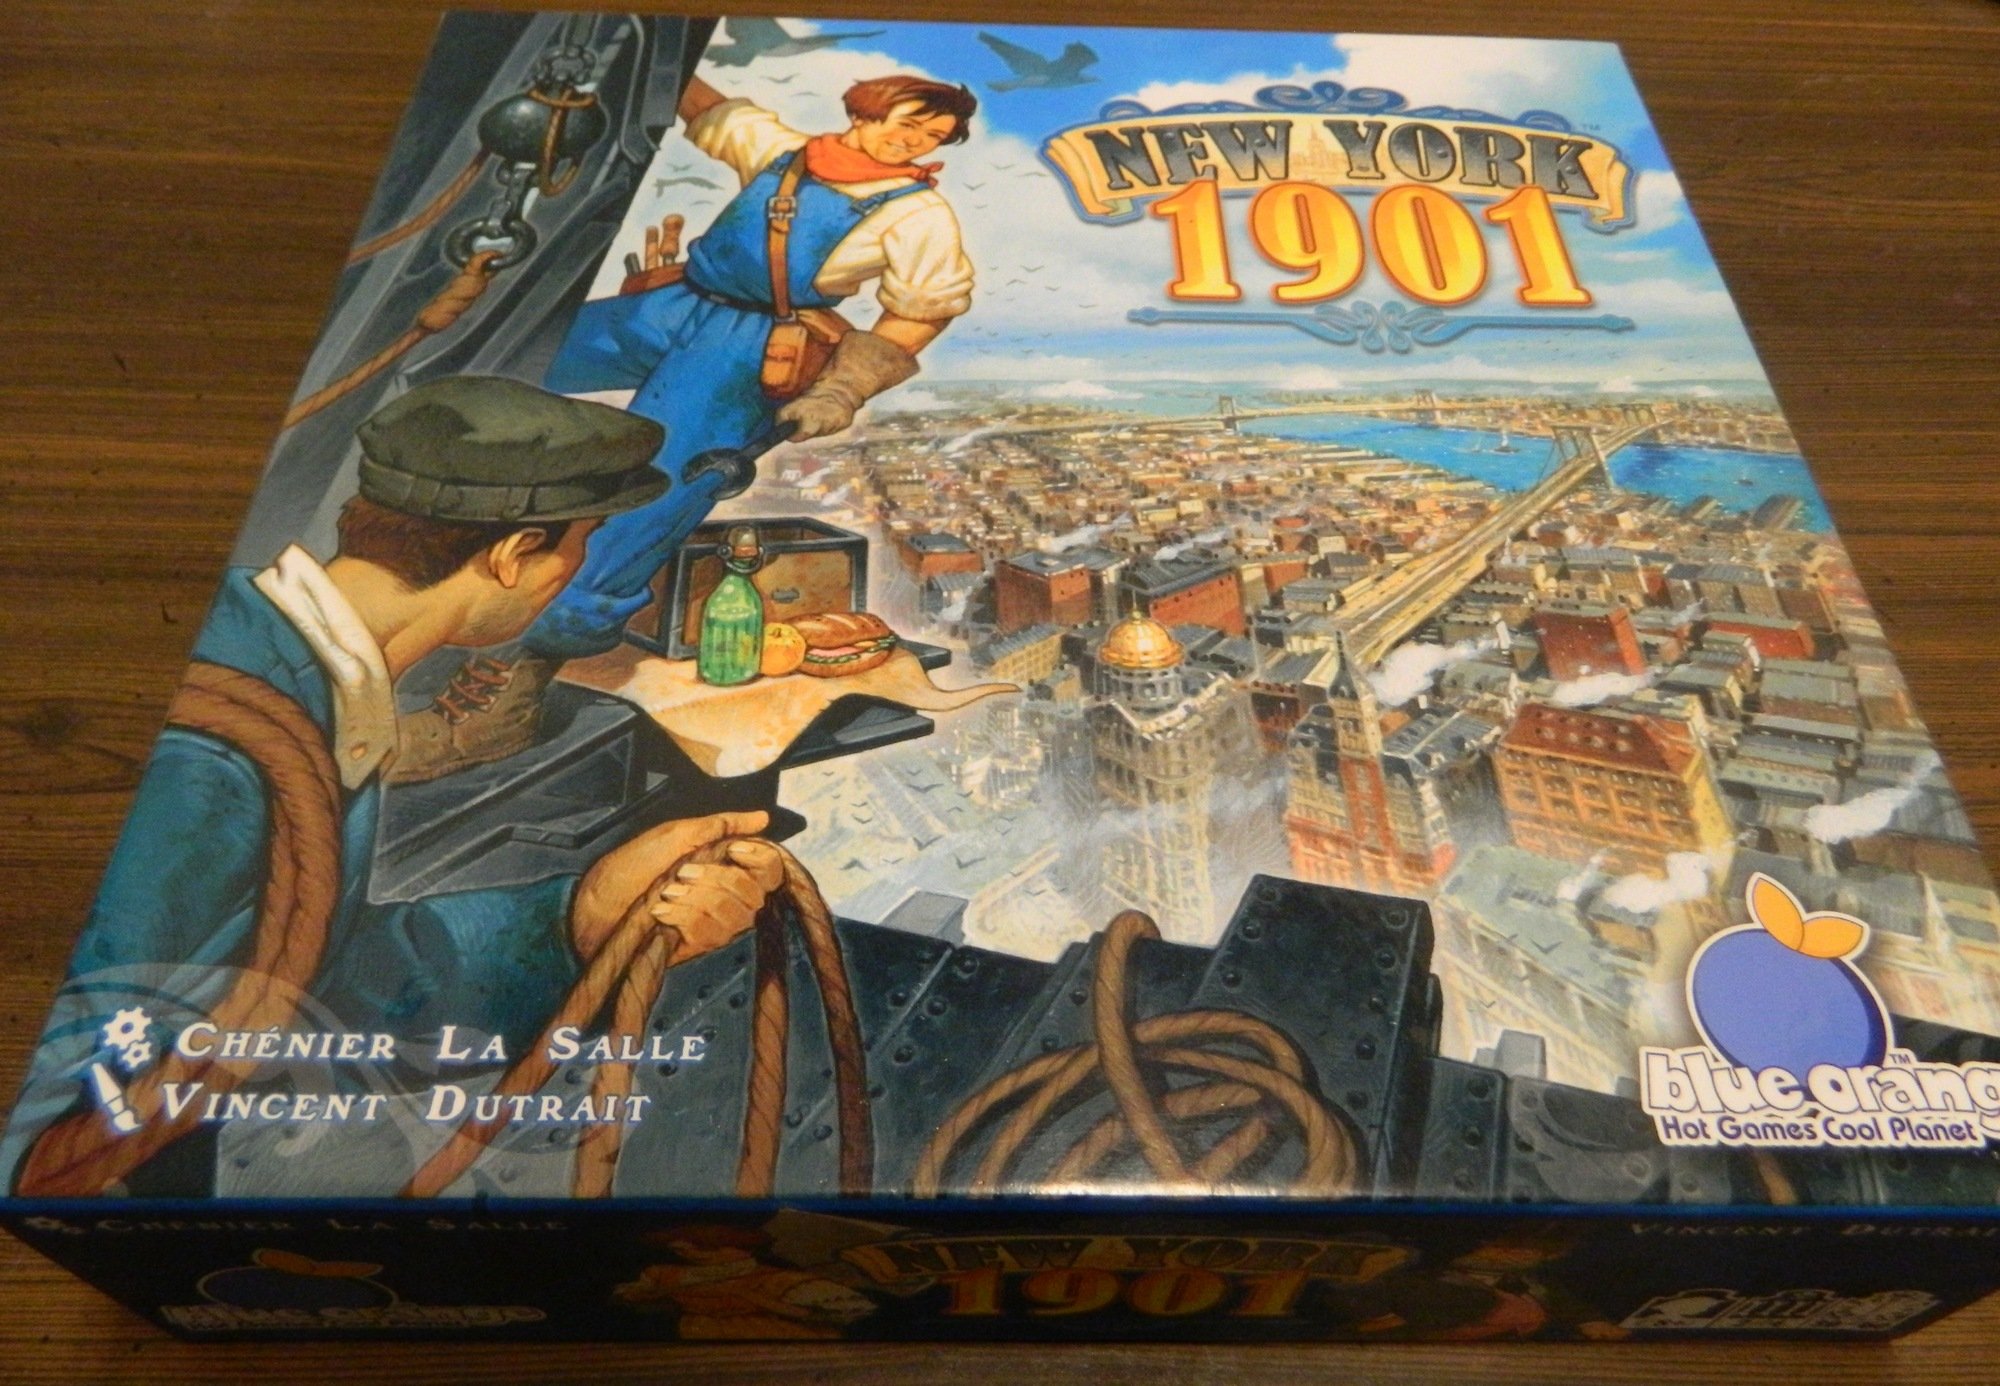 New York 1901 Board Game Review and Rules